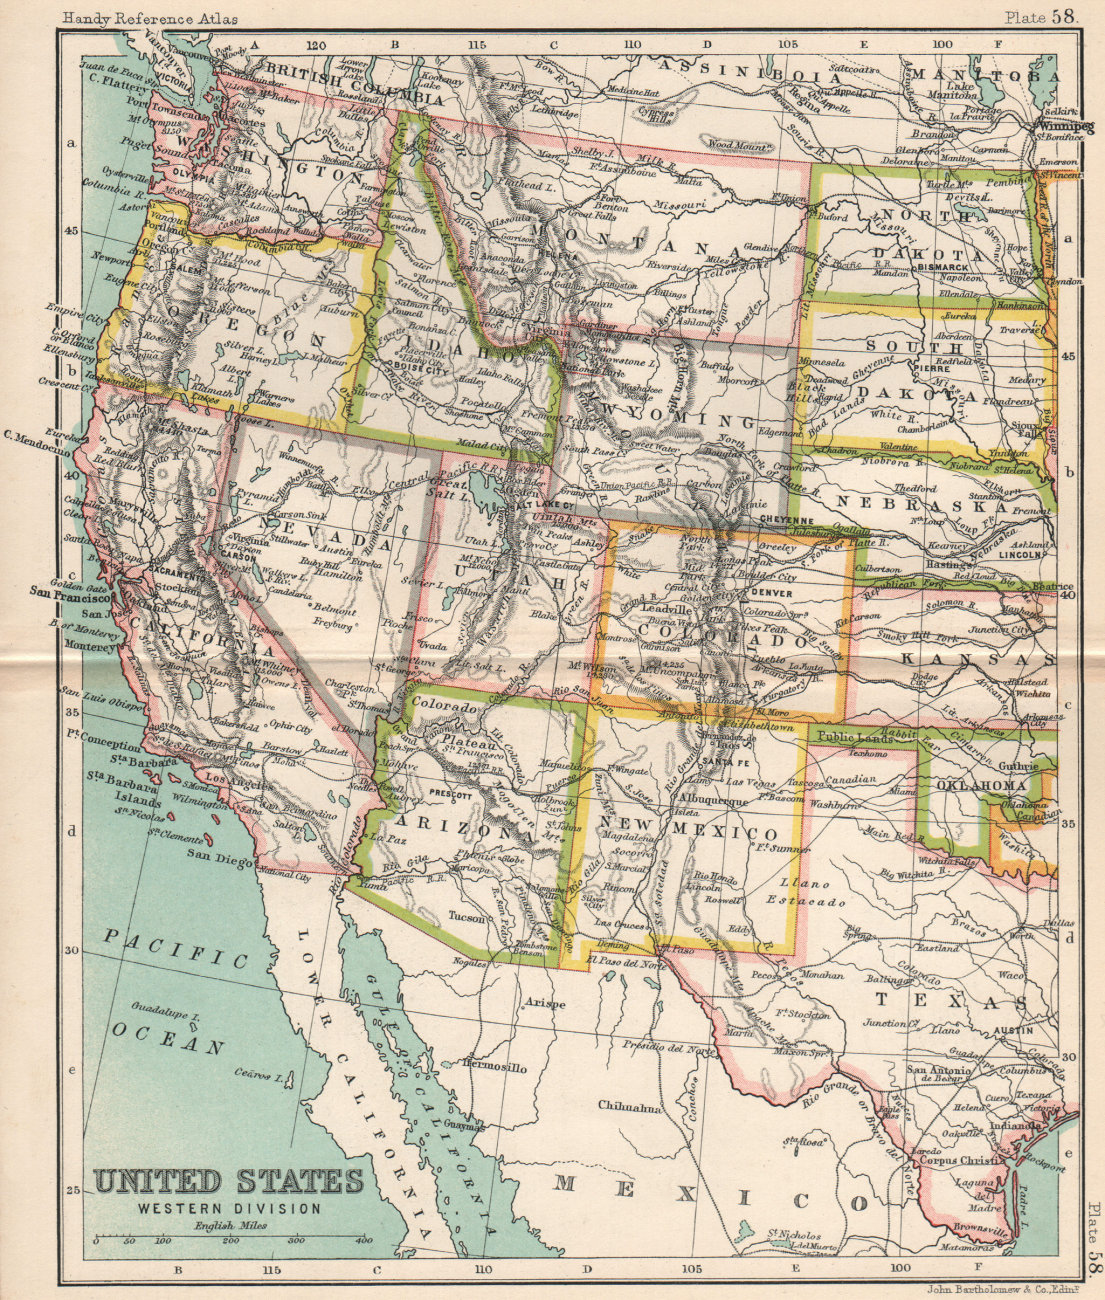 Associate Product United States Western Division. USA. BARTHOLOMEW 1904 old antique map chart